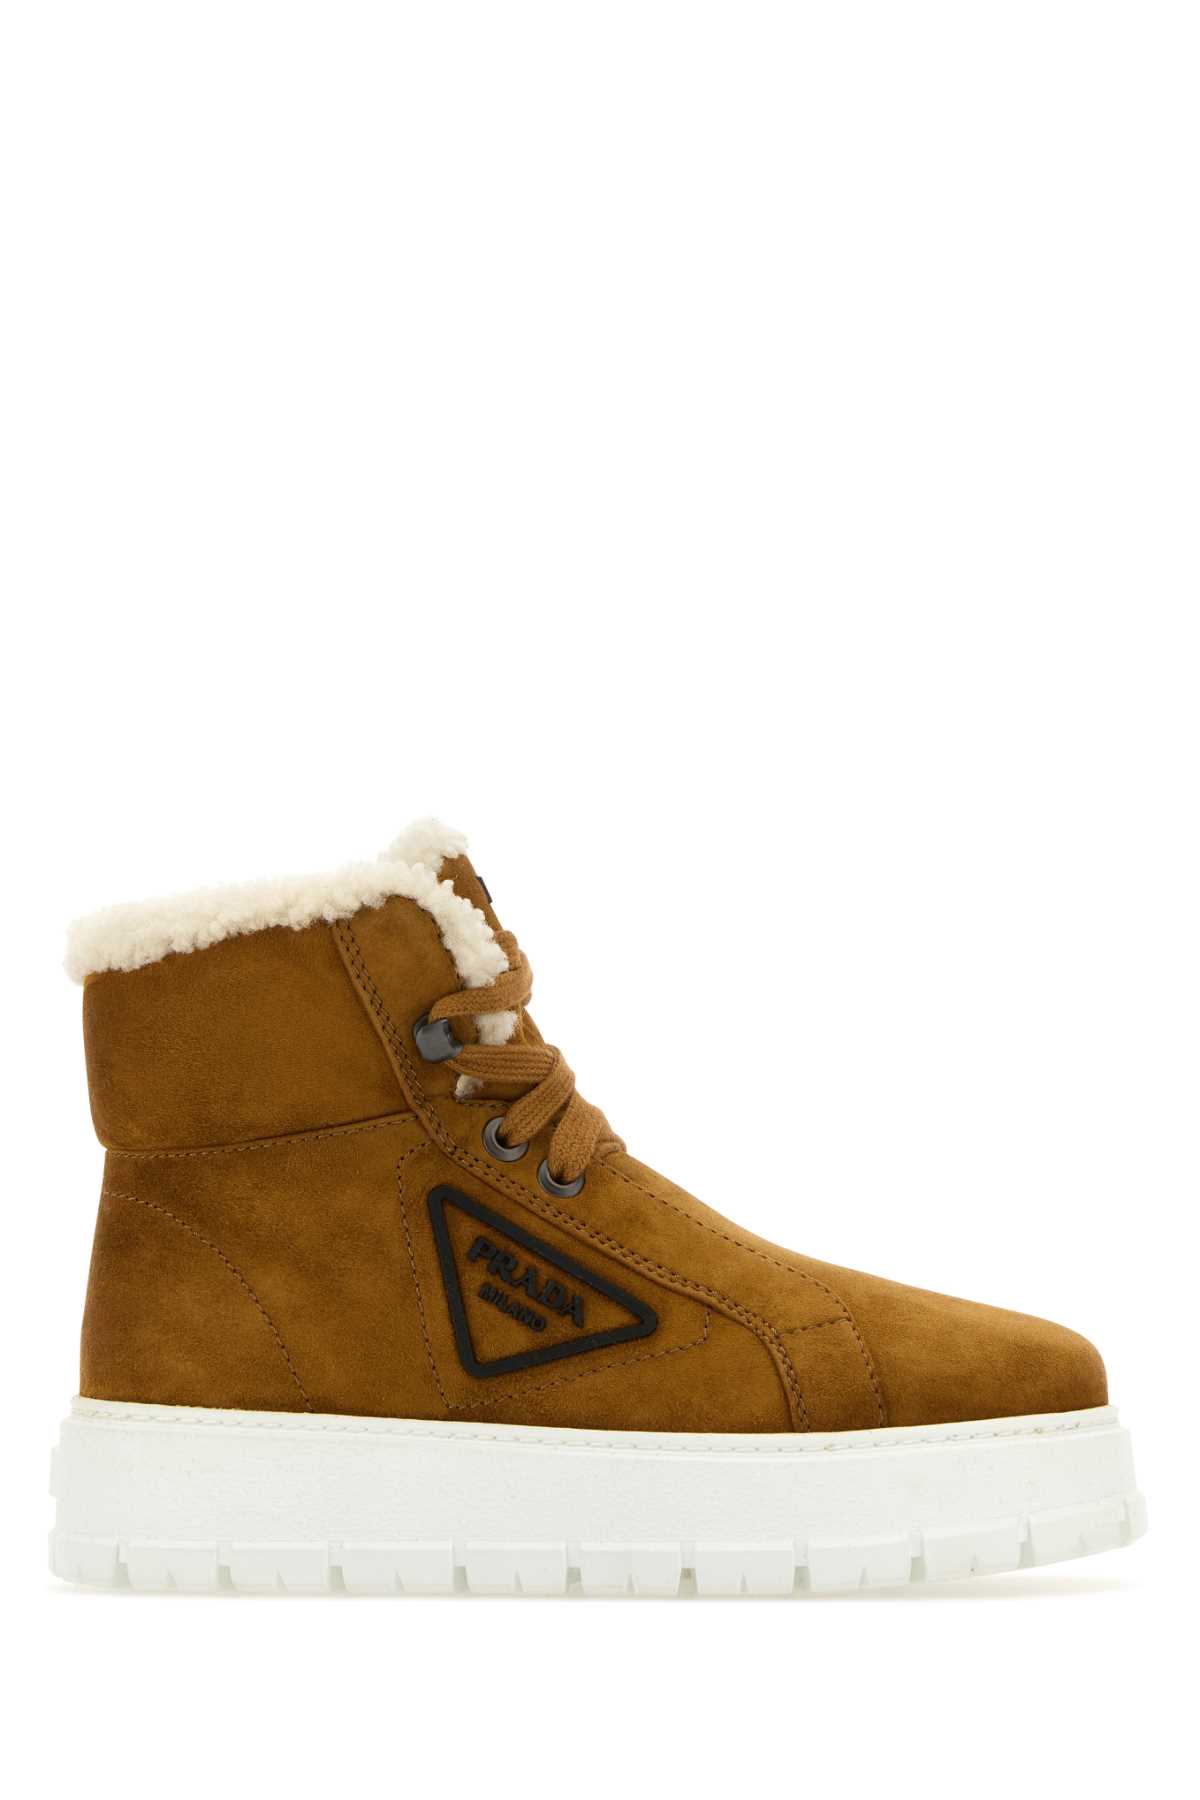 Prada Camel Suede Ankle Boots